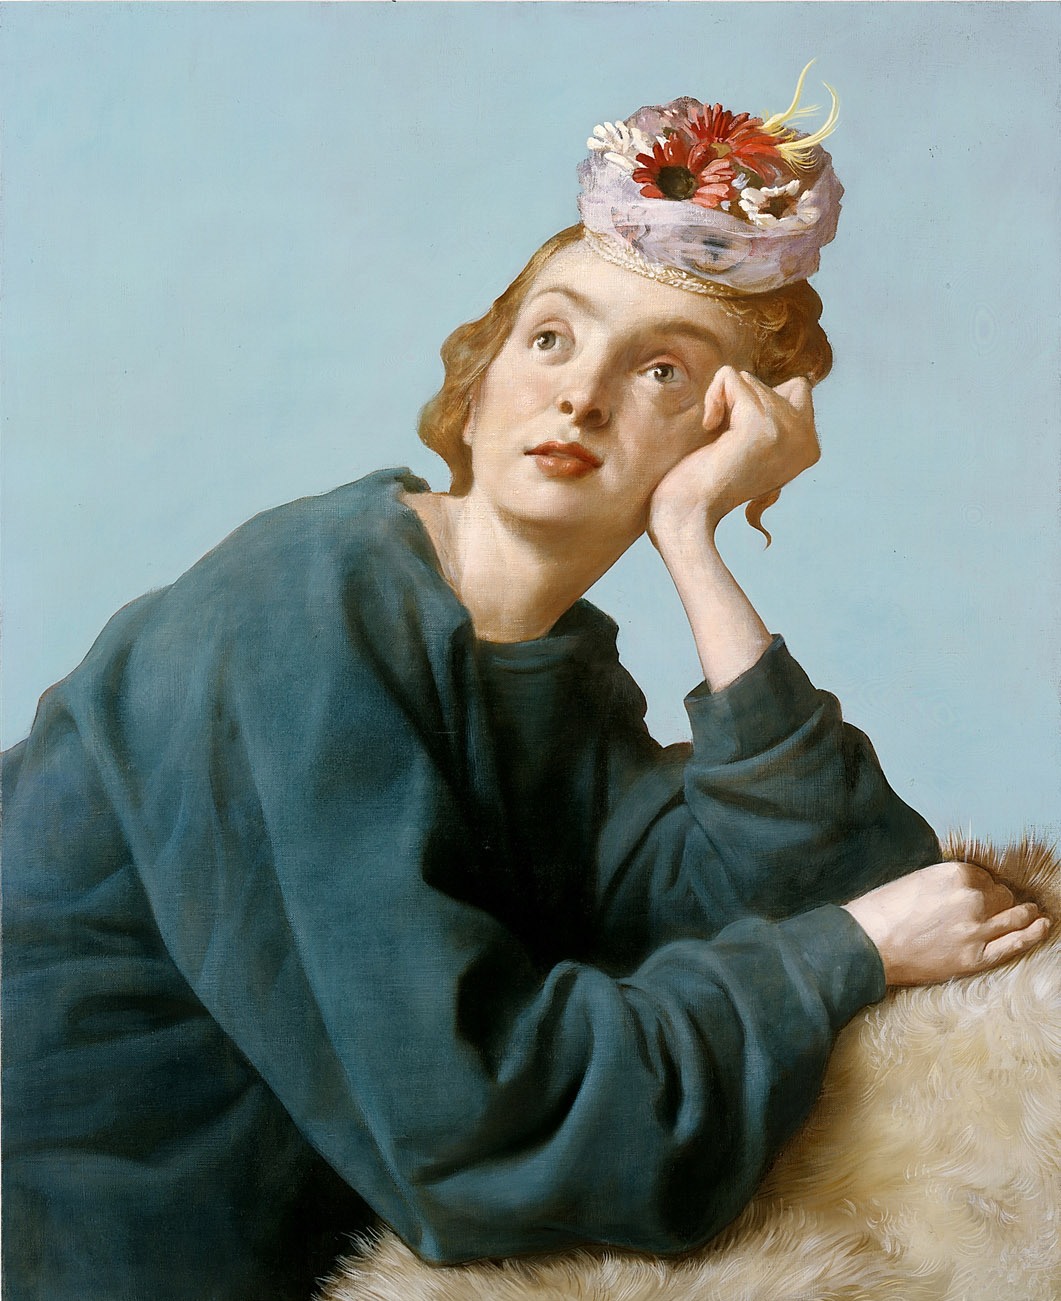 The Penitent, 2004. Oil on canvas. 42 x 34 inches. Private Collection © John Currin. Courtesy Gagosian Gallery. Photography by Rob McKeever